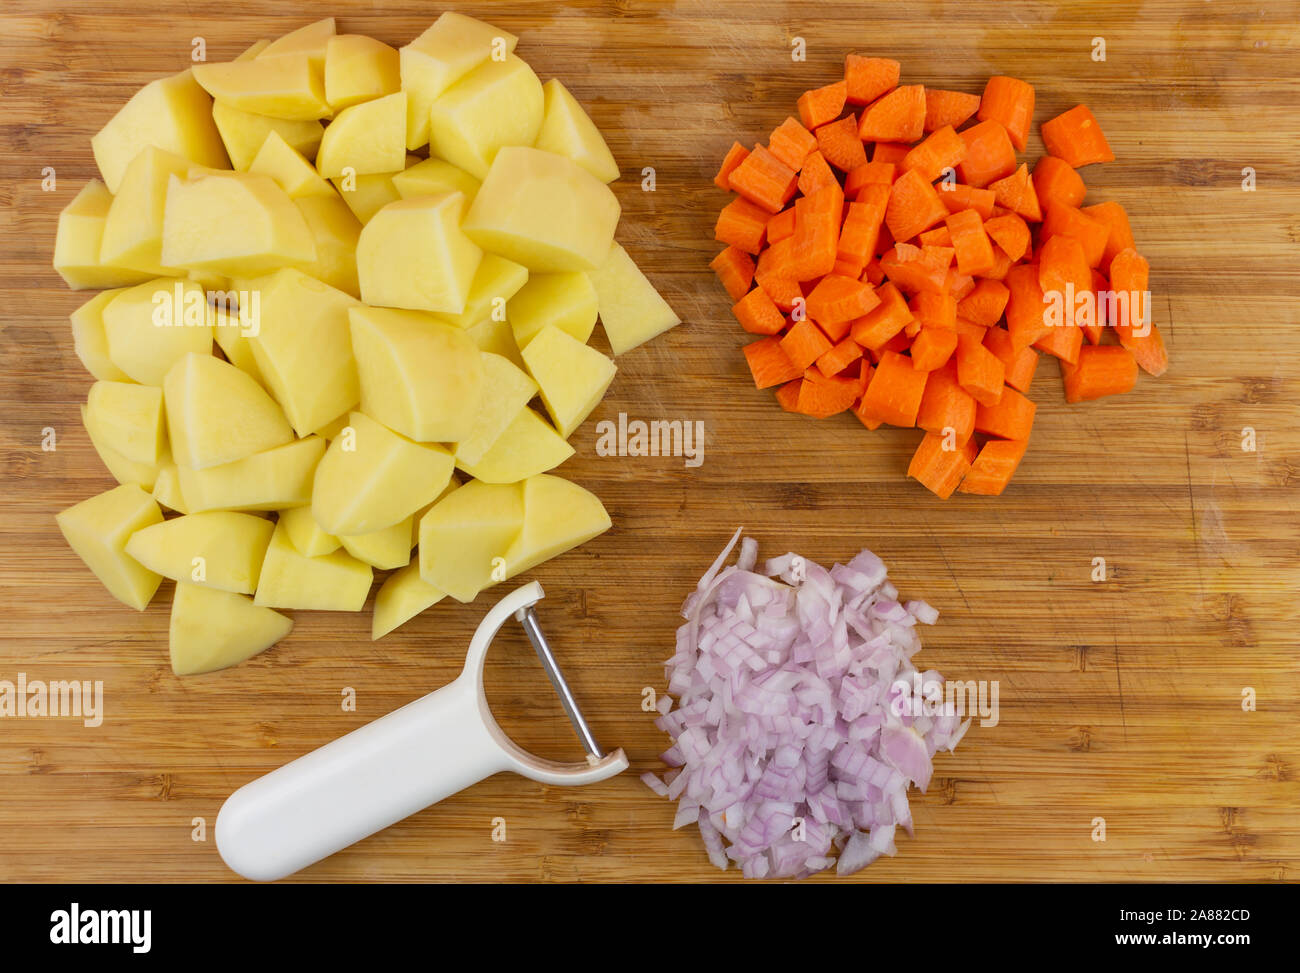 https://c8.alamy.com/comp/2A882CD/view-of-a-wooden-cutting-board-with-pieces-of-potatoes-onions-carrots-and-a-white-food-peeler-2A882CD.jpg